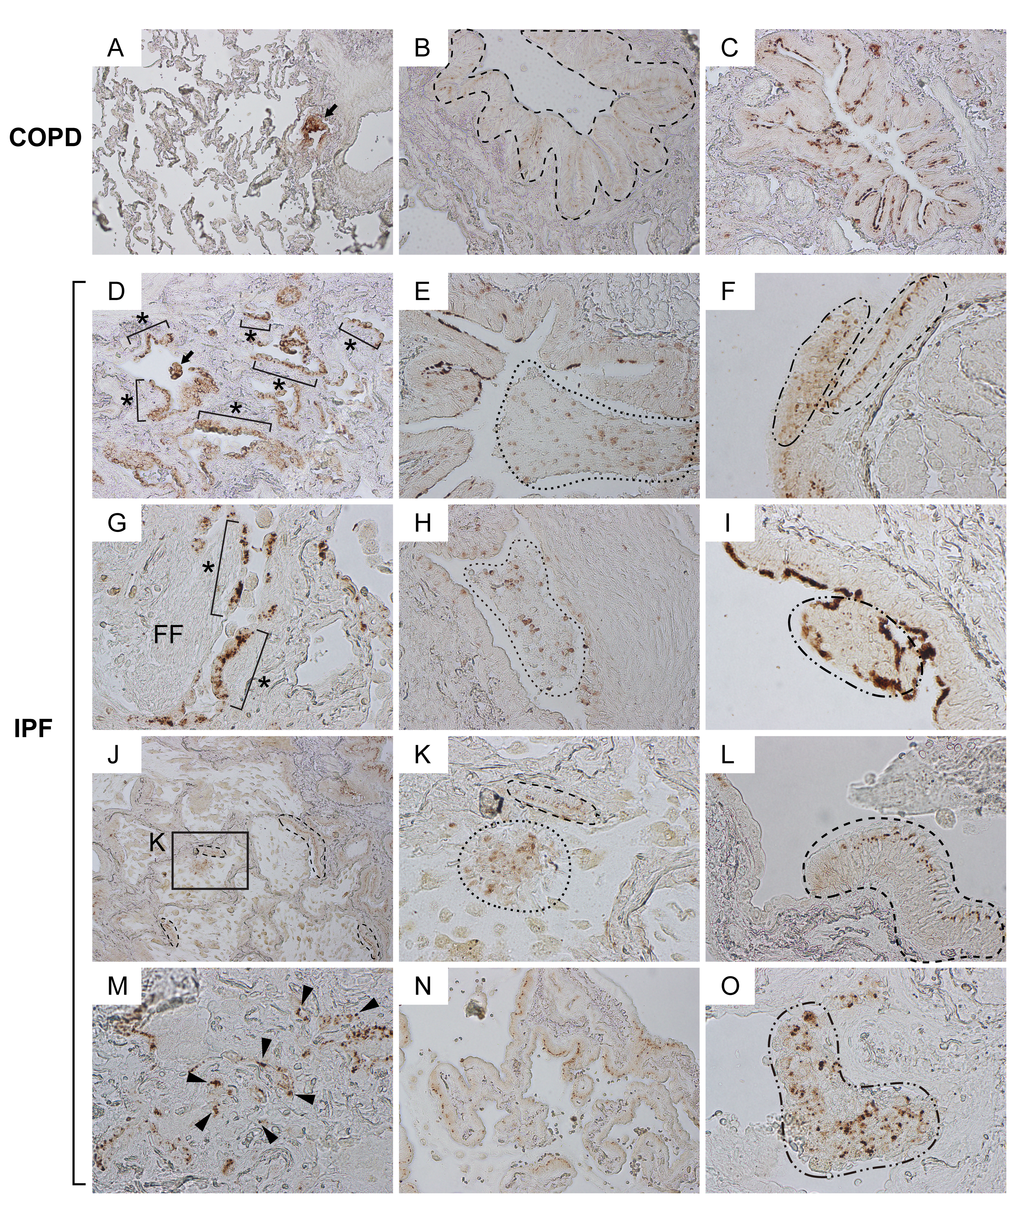 Claudin10-positive cells with marked pleomorphism are widely distributed in various patterns in IPF lungs. Paraffin-embedded lung sections from patients with IPF and COPD were immunohistochemically labeled for Cldn10. Brown signals correspond to Cldn10. (A, B, C) Representative photomicrographs of normal-looking alveoli with slightly remodeled bronchiolar region (A) and bronchiolar regions (B, C) from COPD lungs are shown. Despite the variation of subcellular localization of Cldn10, Cldn10-positive cells mostly displayed organized cell arrangements. Arrow in (A) denotes cytoplasmic and/or nuclear expression of Cldn10 in the cells at terminal (or respiratory) bronchiole. Dashed-line in (B) encompasses bronchiolar epithelium in which Cldn10 signals are confined to the uppermost portion of the lateral membrane between the epithelial cells, apparently corresponding to tight junctions. Cldn10 expression was occasionally spotted at luminal end of the bronchiolar epithelium (C). (D-O) Representative photomicrographs with different arrangements of Cldn10-positive cells are shown. (D) Asterisks denote Cldn10-positive epithelial monolayers in a moderately fibrotic region. Arrow denotes a cellular mass in the airspace containing Cldn10-positive cells. (E) Area circled by dotted line denotes mosaic cell mass in the airspace containing Cldn10-positive and negative cells. (F) Two different arrangements of club cells were juxtaposed with each other; one with organized columnar cells expressing Cldn10 at the uppermost portion of the lateral membrane between the epithelial cells (area circled by dashed line) and the other with mosaic mixtures of Cldn10-positive and negative cells (area circled by dot-dashed line). (G) Asterisks denote Cldn10-positive epithelial monolayers. Luminal side of fibroblastic foci (FF) is lined by Cldn10-positive and negative cells with round-to-oval shape. (H) Area circled by dotted line denotes a mosaic cell mass containing Cldn10-positive and negative cells. Highly fibrotic area is located to the right of the mass, where Cldn10 signals are barely observed at the luminal edge. I: Area circled by dot-dashed line denotes a polypoid cell mass containing Cldn10-positive and negative cells. (J) Area with honeycomb change display multiple cysts lined by Cldn10-positive club cell monolayers. (K) Magnified view of the boxed region in (J) display a mosaic cell mass in the airspace containing Cldn10-positive and negative cells (area surrounded by dotted line) and Cldn10-positive monolayer that partially line the cyst wall (area surrounded by dashed line). (L) Area surrounded by dashed line denotes columnar club cells forming organized monolayer. The expression of Cldn10 is confined to the uppermost portion of the lateral membrane between the epithelial cells, apparently at tight junctions. Adjacent bronchiolar epithelium to the left is lined by cuboidal epithelial cells negative or weakly positive for Cldn10. (M) Fibrotic interstitium with Cldn10-positive club cells randomly distributed therein. Numerous Cldn10-negative cuboidal cells are also spotted in the vicinity of Cldn10-positive cells. (N) Cldn10-positive club cells with oval-to-columnar shape populate the alveolar wall in a monolayer arrangement. (O) Area circled by dot-dashed line denotes a mosaic cell mass containing Cldn10-positive and negative cells. The mass barely attaches to the lung structure located to the right. Original magnifications: x100 (A, J); x200 (B, C, D, E, H, N); x400 (F, G, I, K, L, M, O).